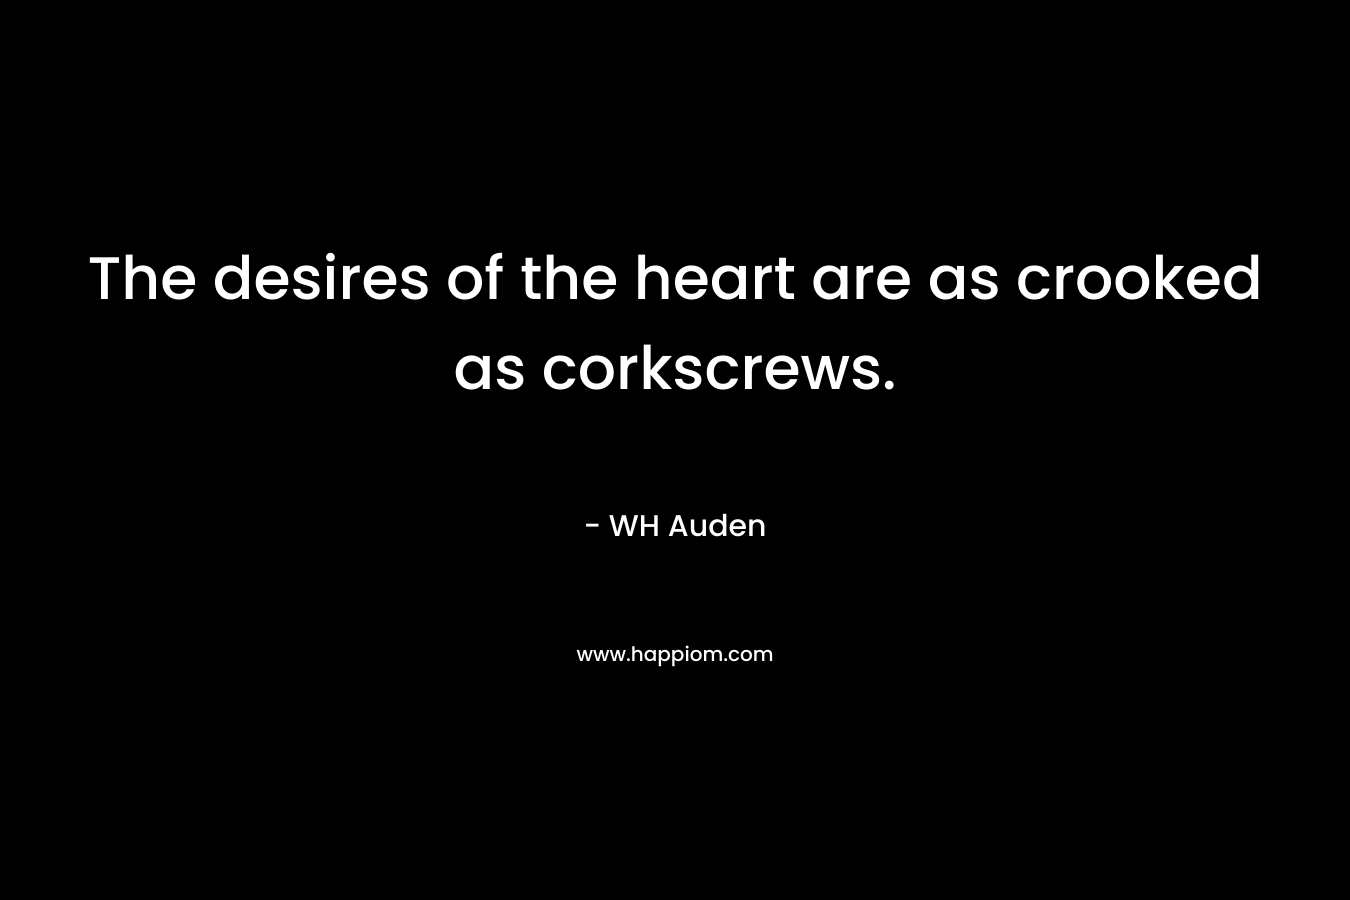 The desires of the heart are as crooked as corkscrews.